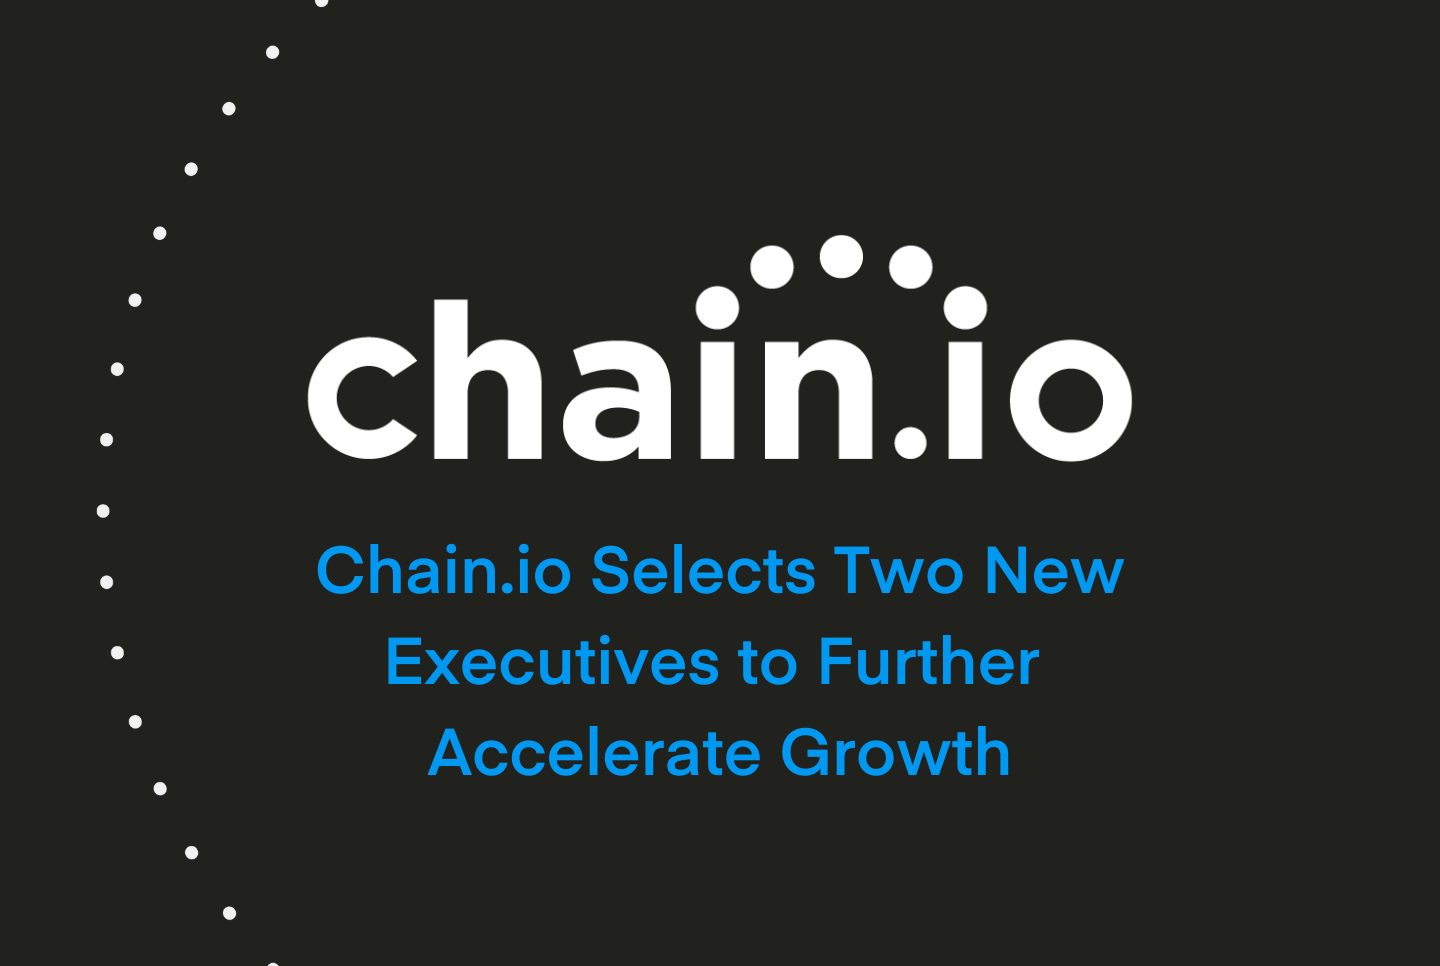 Chain.io appoints Eric Green as Chief Operations Officer and Patrick Ryan as Vice President of Sales